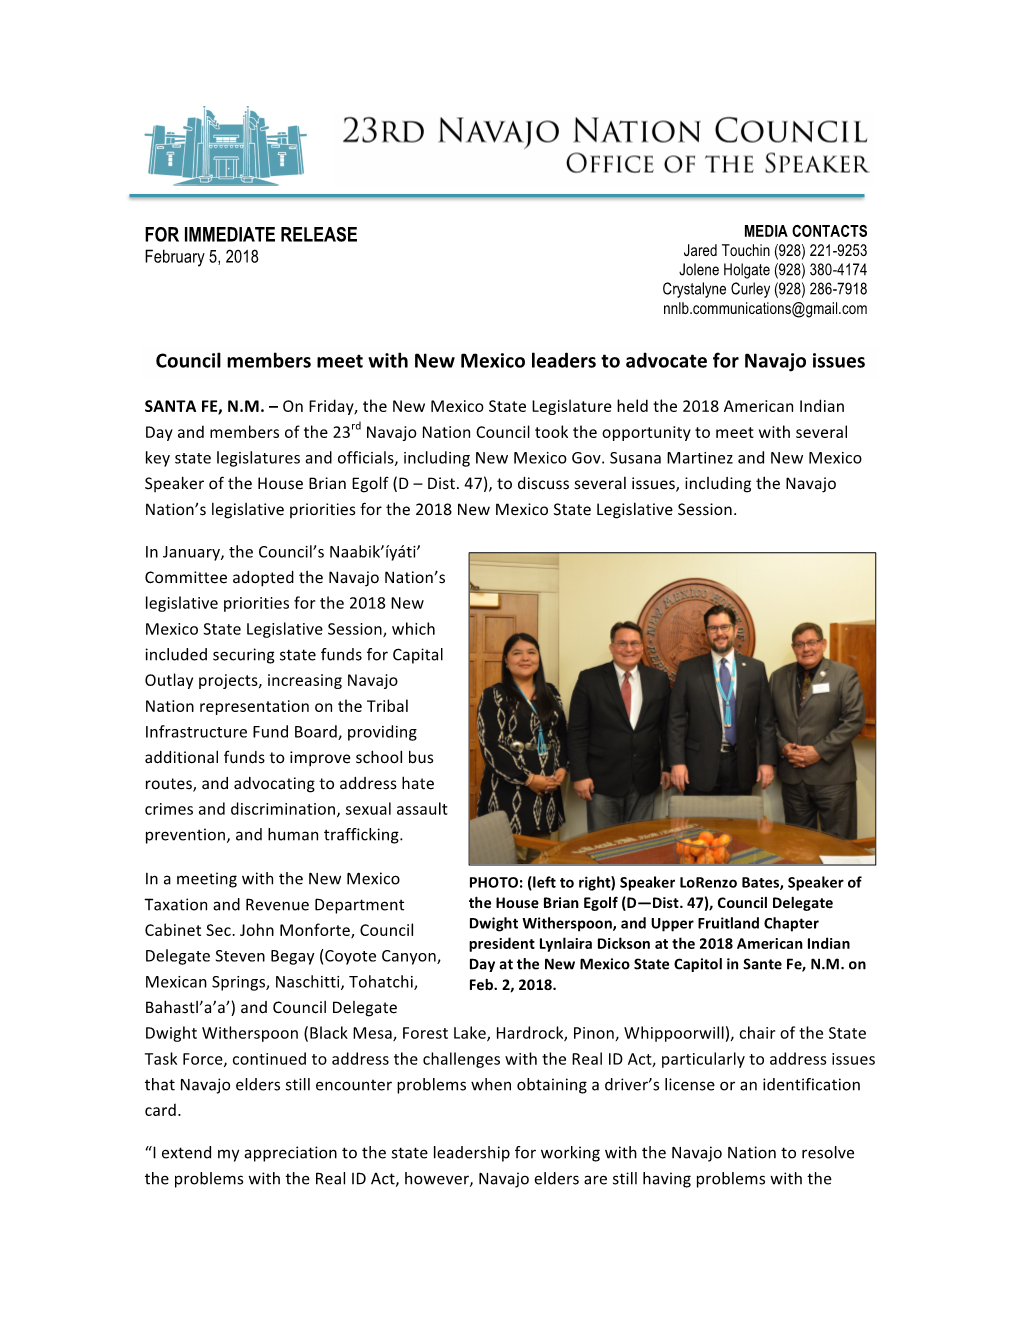 Council Members Meet with New Mexico Leaders to Advocate for Navajo Issues